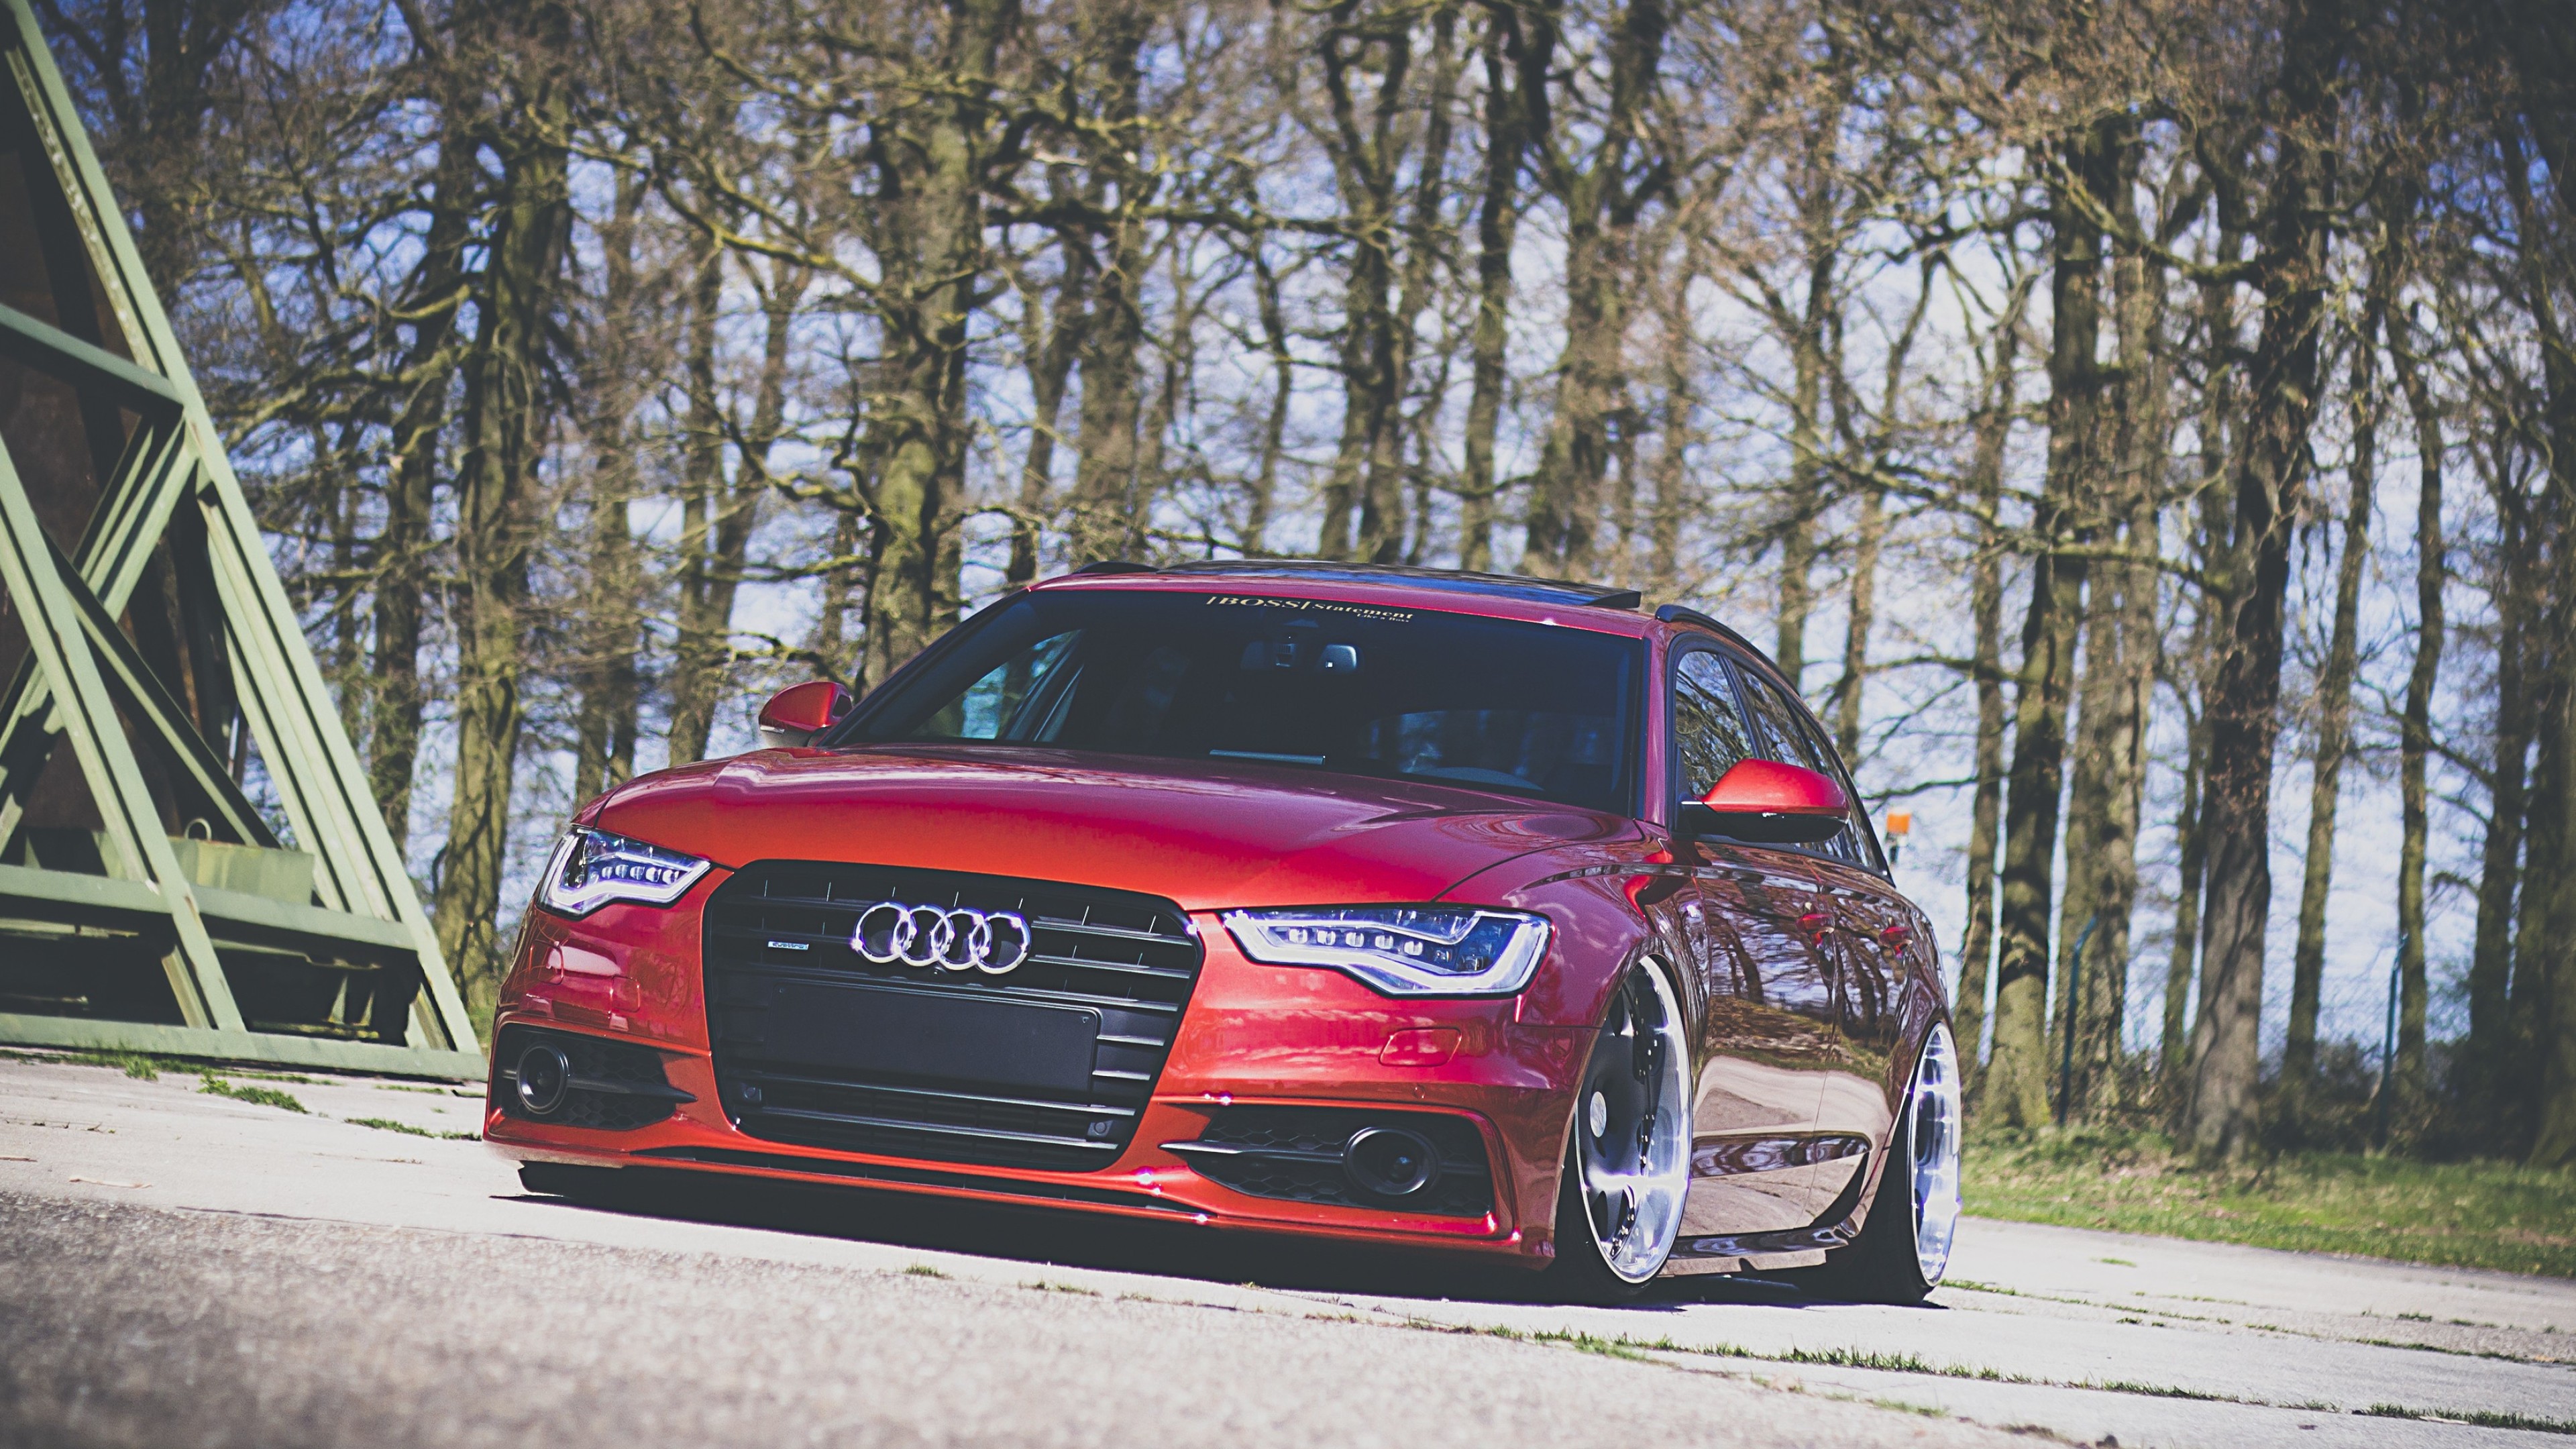 Audi S4, Audi A4, Stance, Car, Red cars, Vehicle Wallpaper